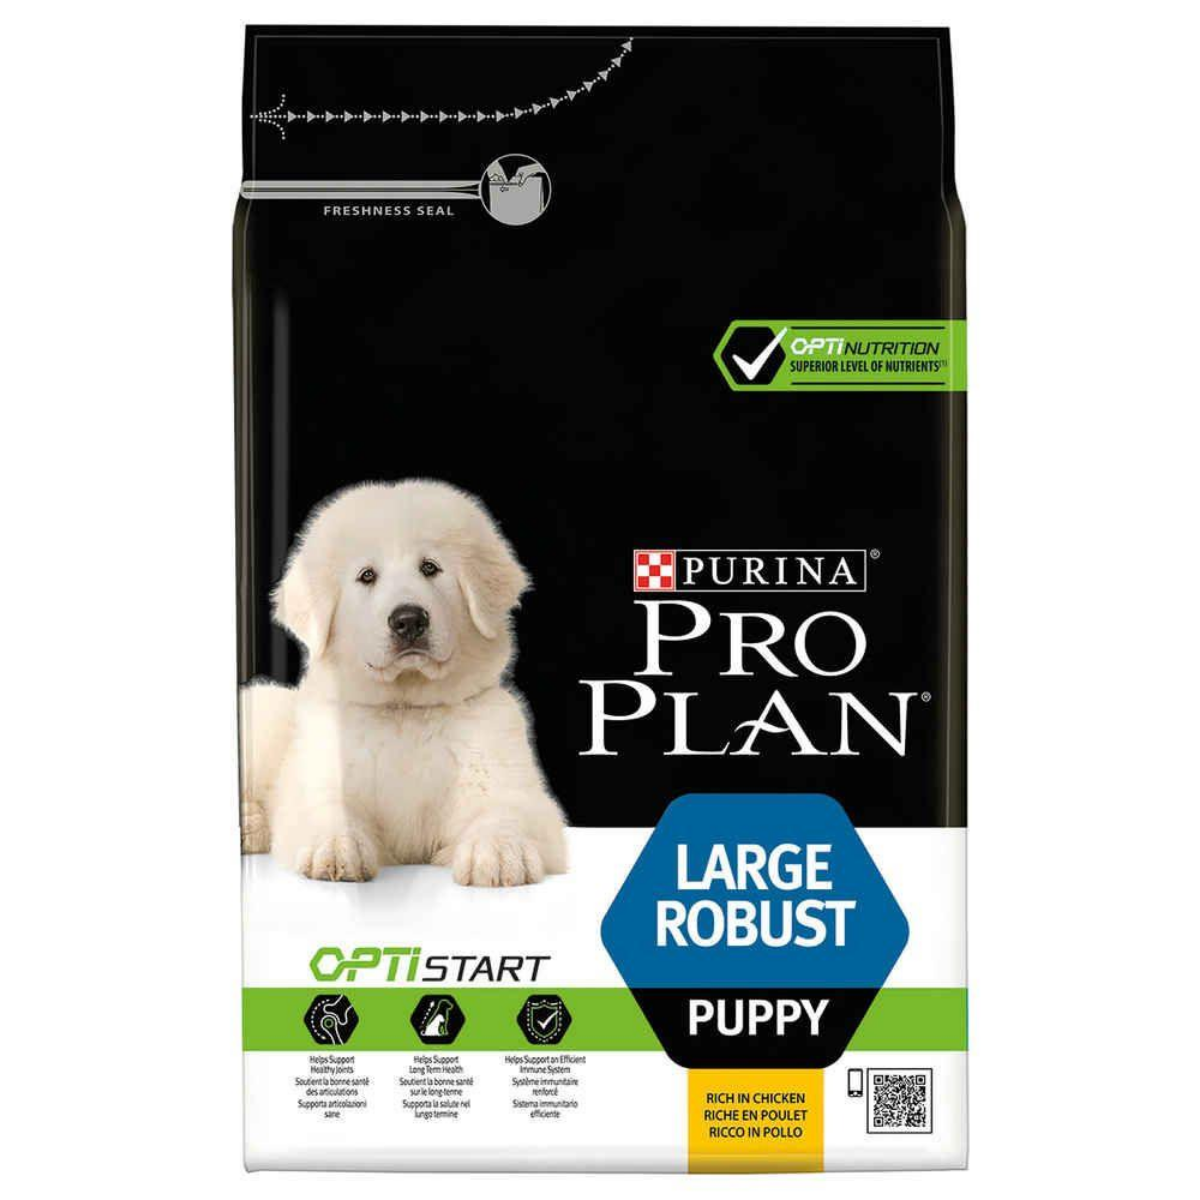 Purina Pro Plan Dog Large Puppy Robust 3 kg ChezVous.re Shopping et